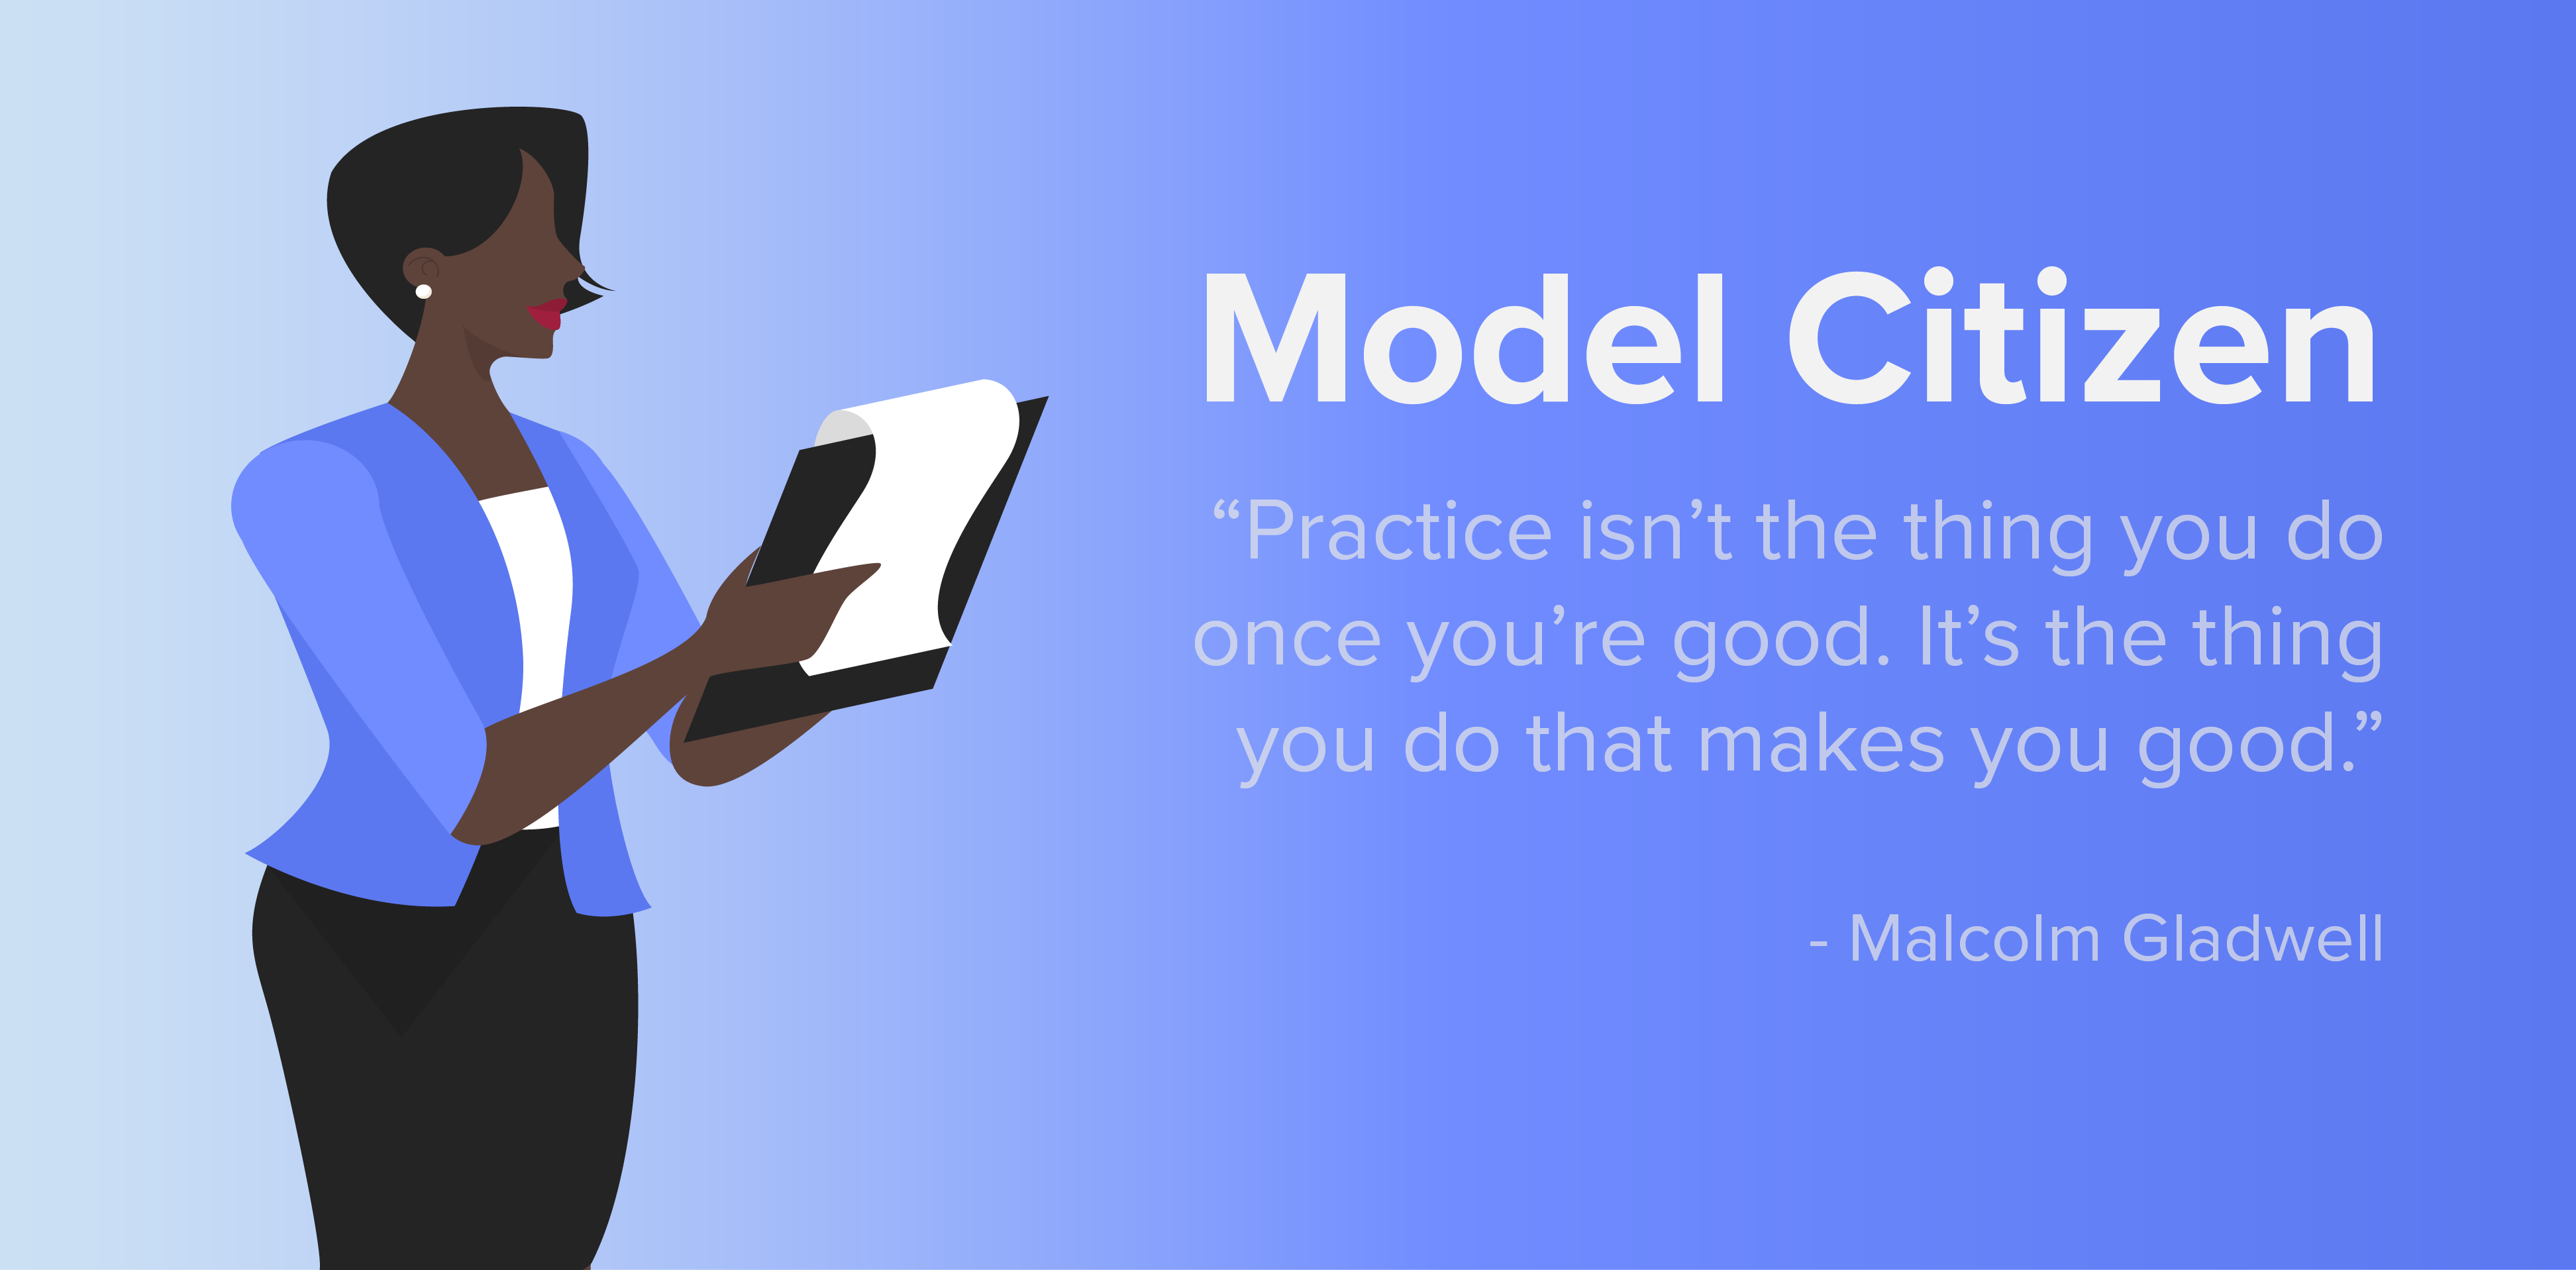 Model Citizen. "Practice isn't the thing you do once you're good. It's the thing you do that makes you good." -Malcolm Gladwell